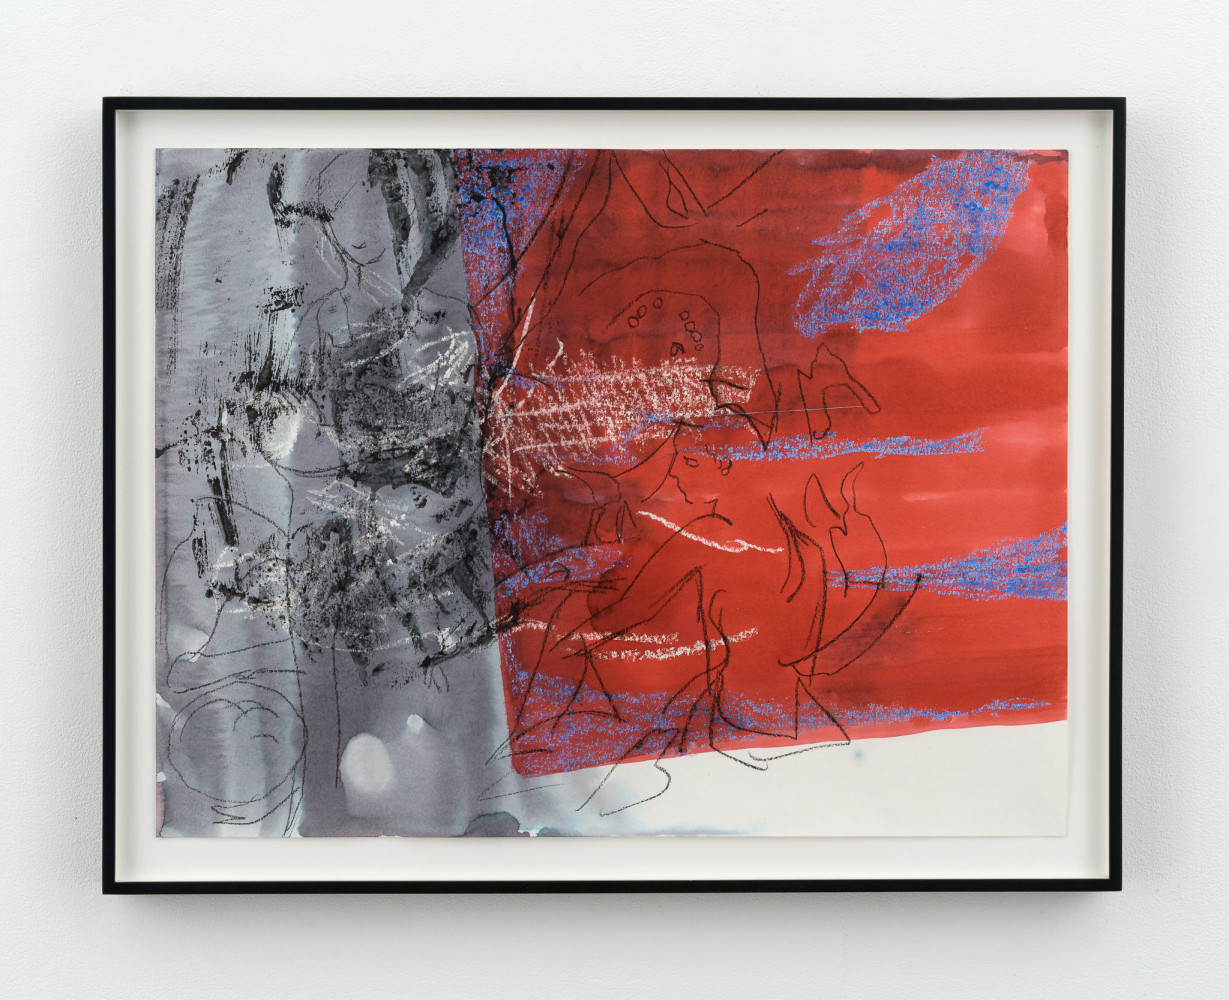 Nick Mauss
Untitled
2020
Watercolor, encaustic, acrylic, and pencil on paper
18 x 24 inches (45.7 x 61 cm)
20 5/8 x 26 5/8 inches (52.4 x 67.6 cm) framed
Signed verso
NM 798

&amp;nbsp;

INQUIRE